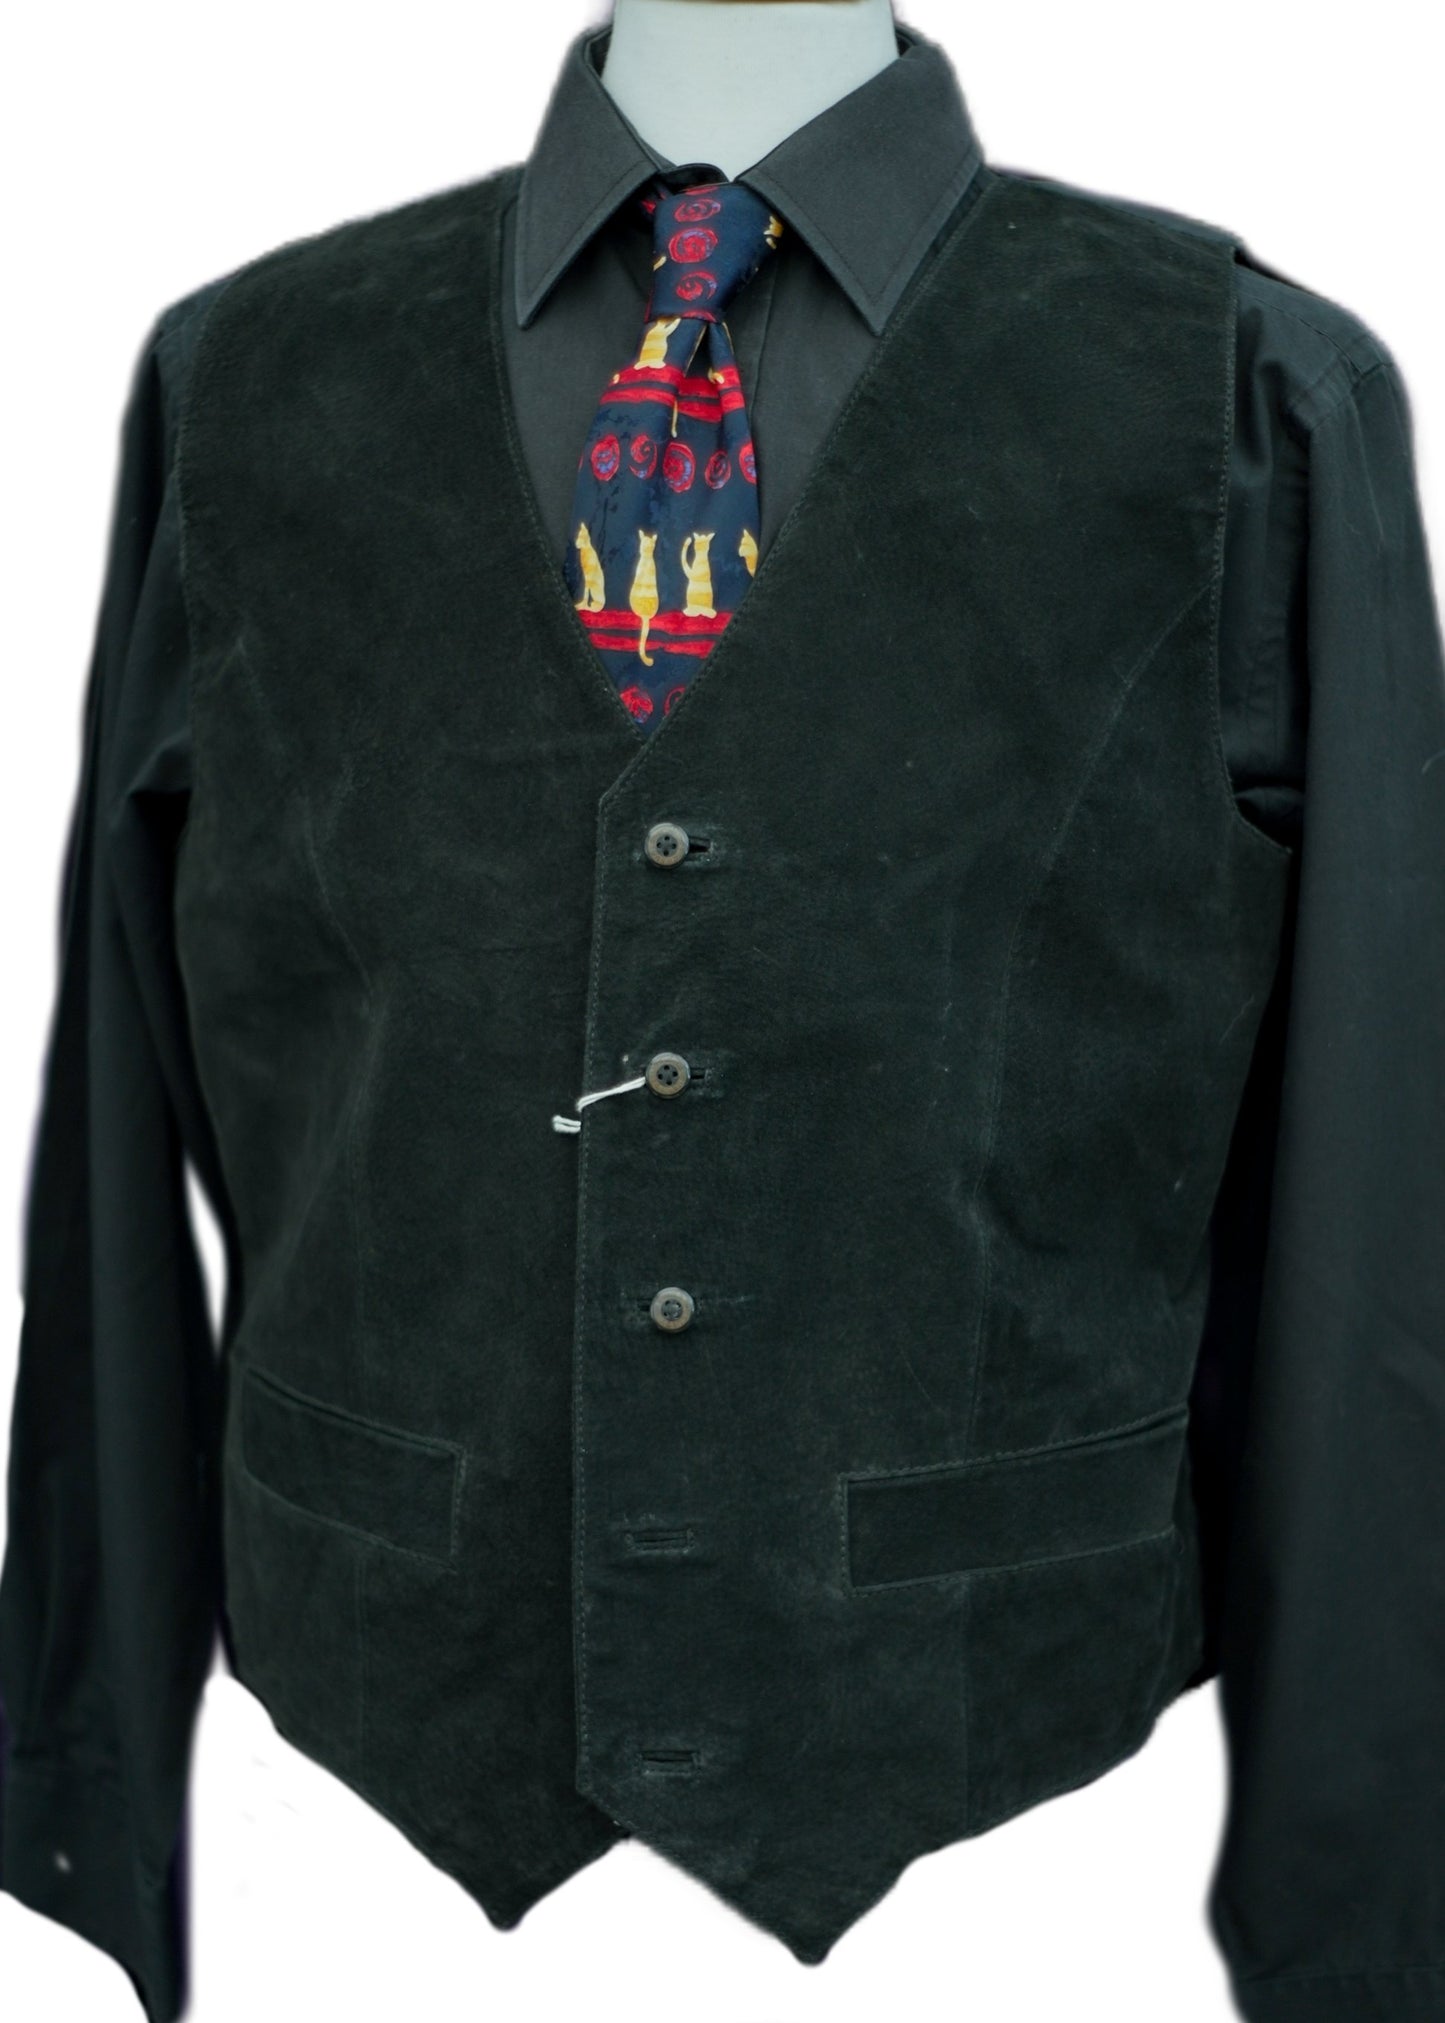 black suede waistcoat 40 inch chest